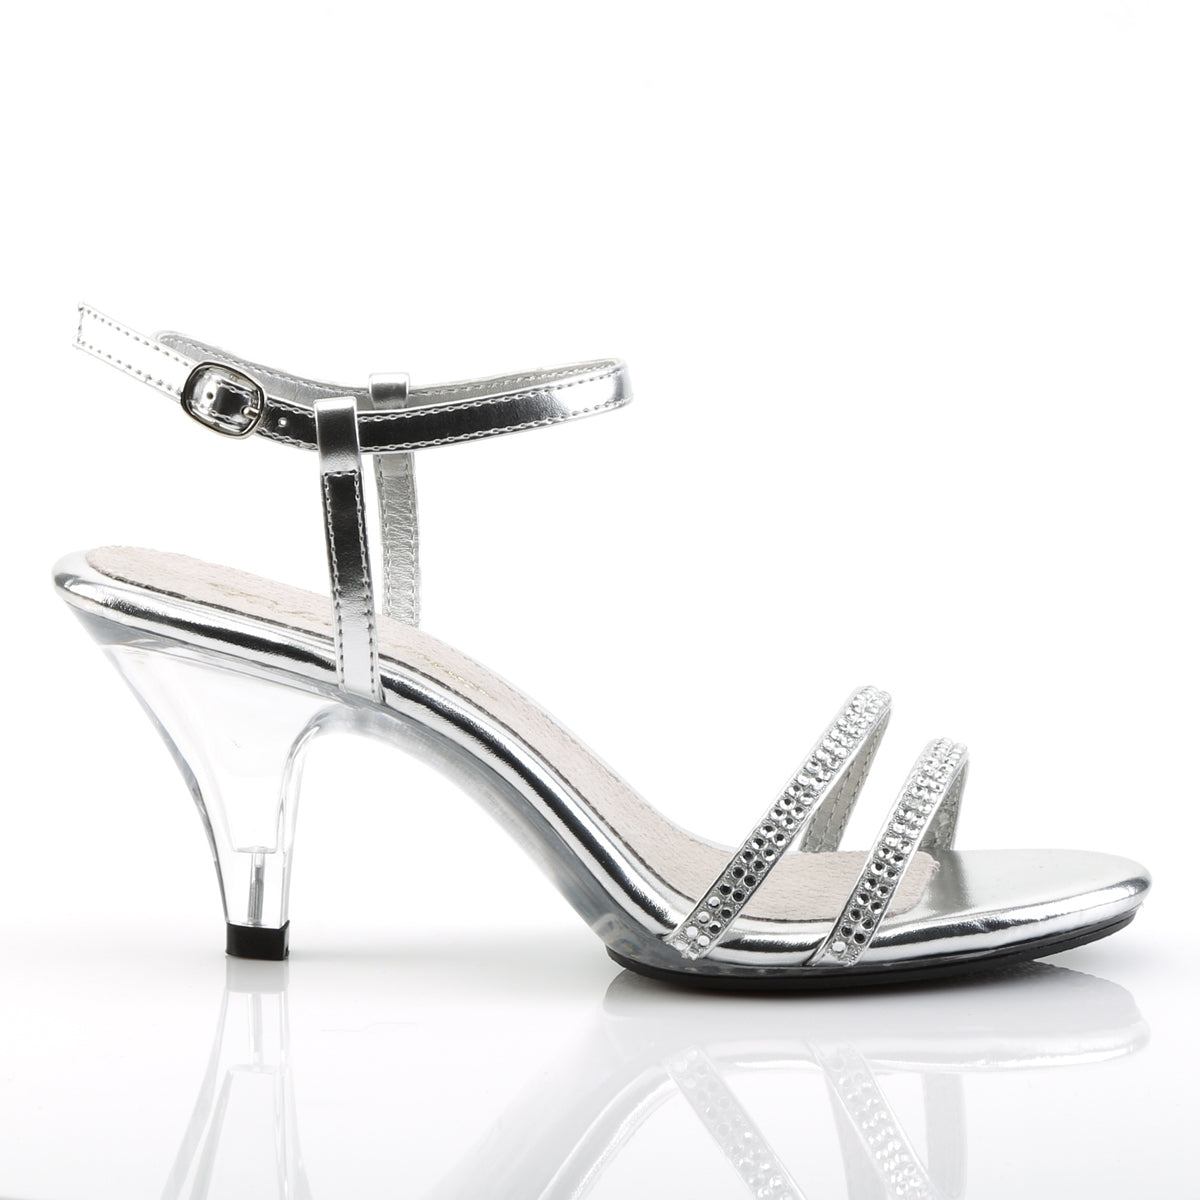 BELLE-316 Fabulicious 3 Inch Heel Silver Sexy Shoes-Fabulicious- Sexy Shoes Fetish Heels